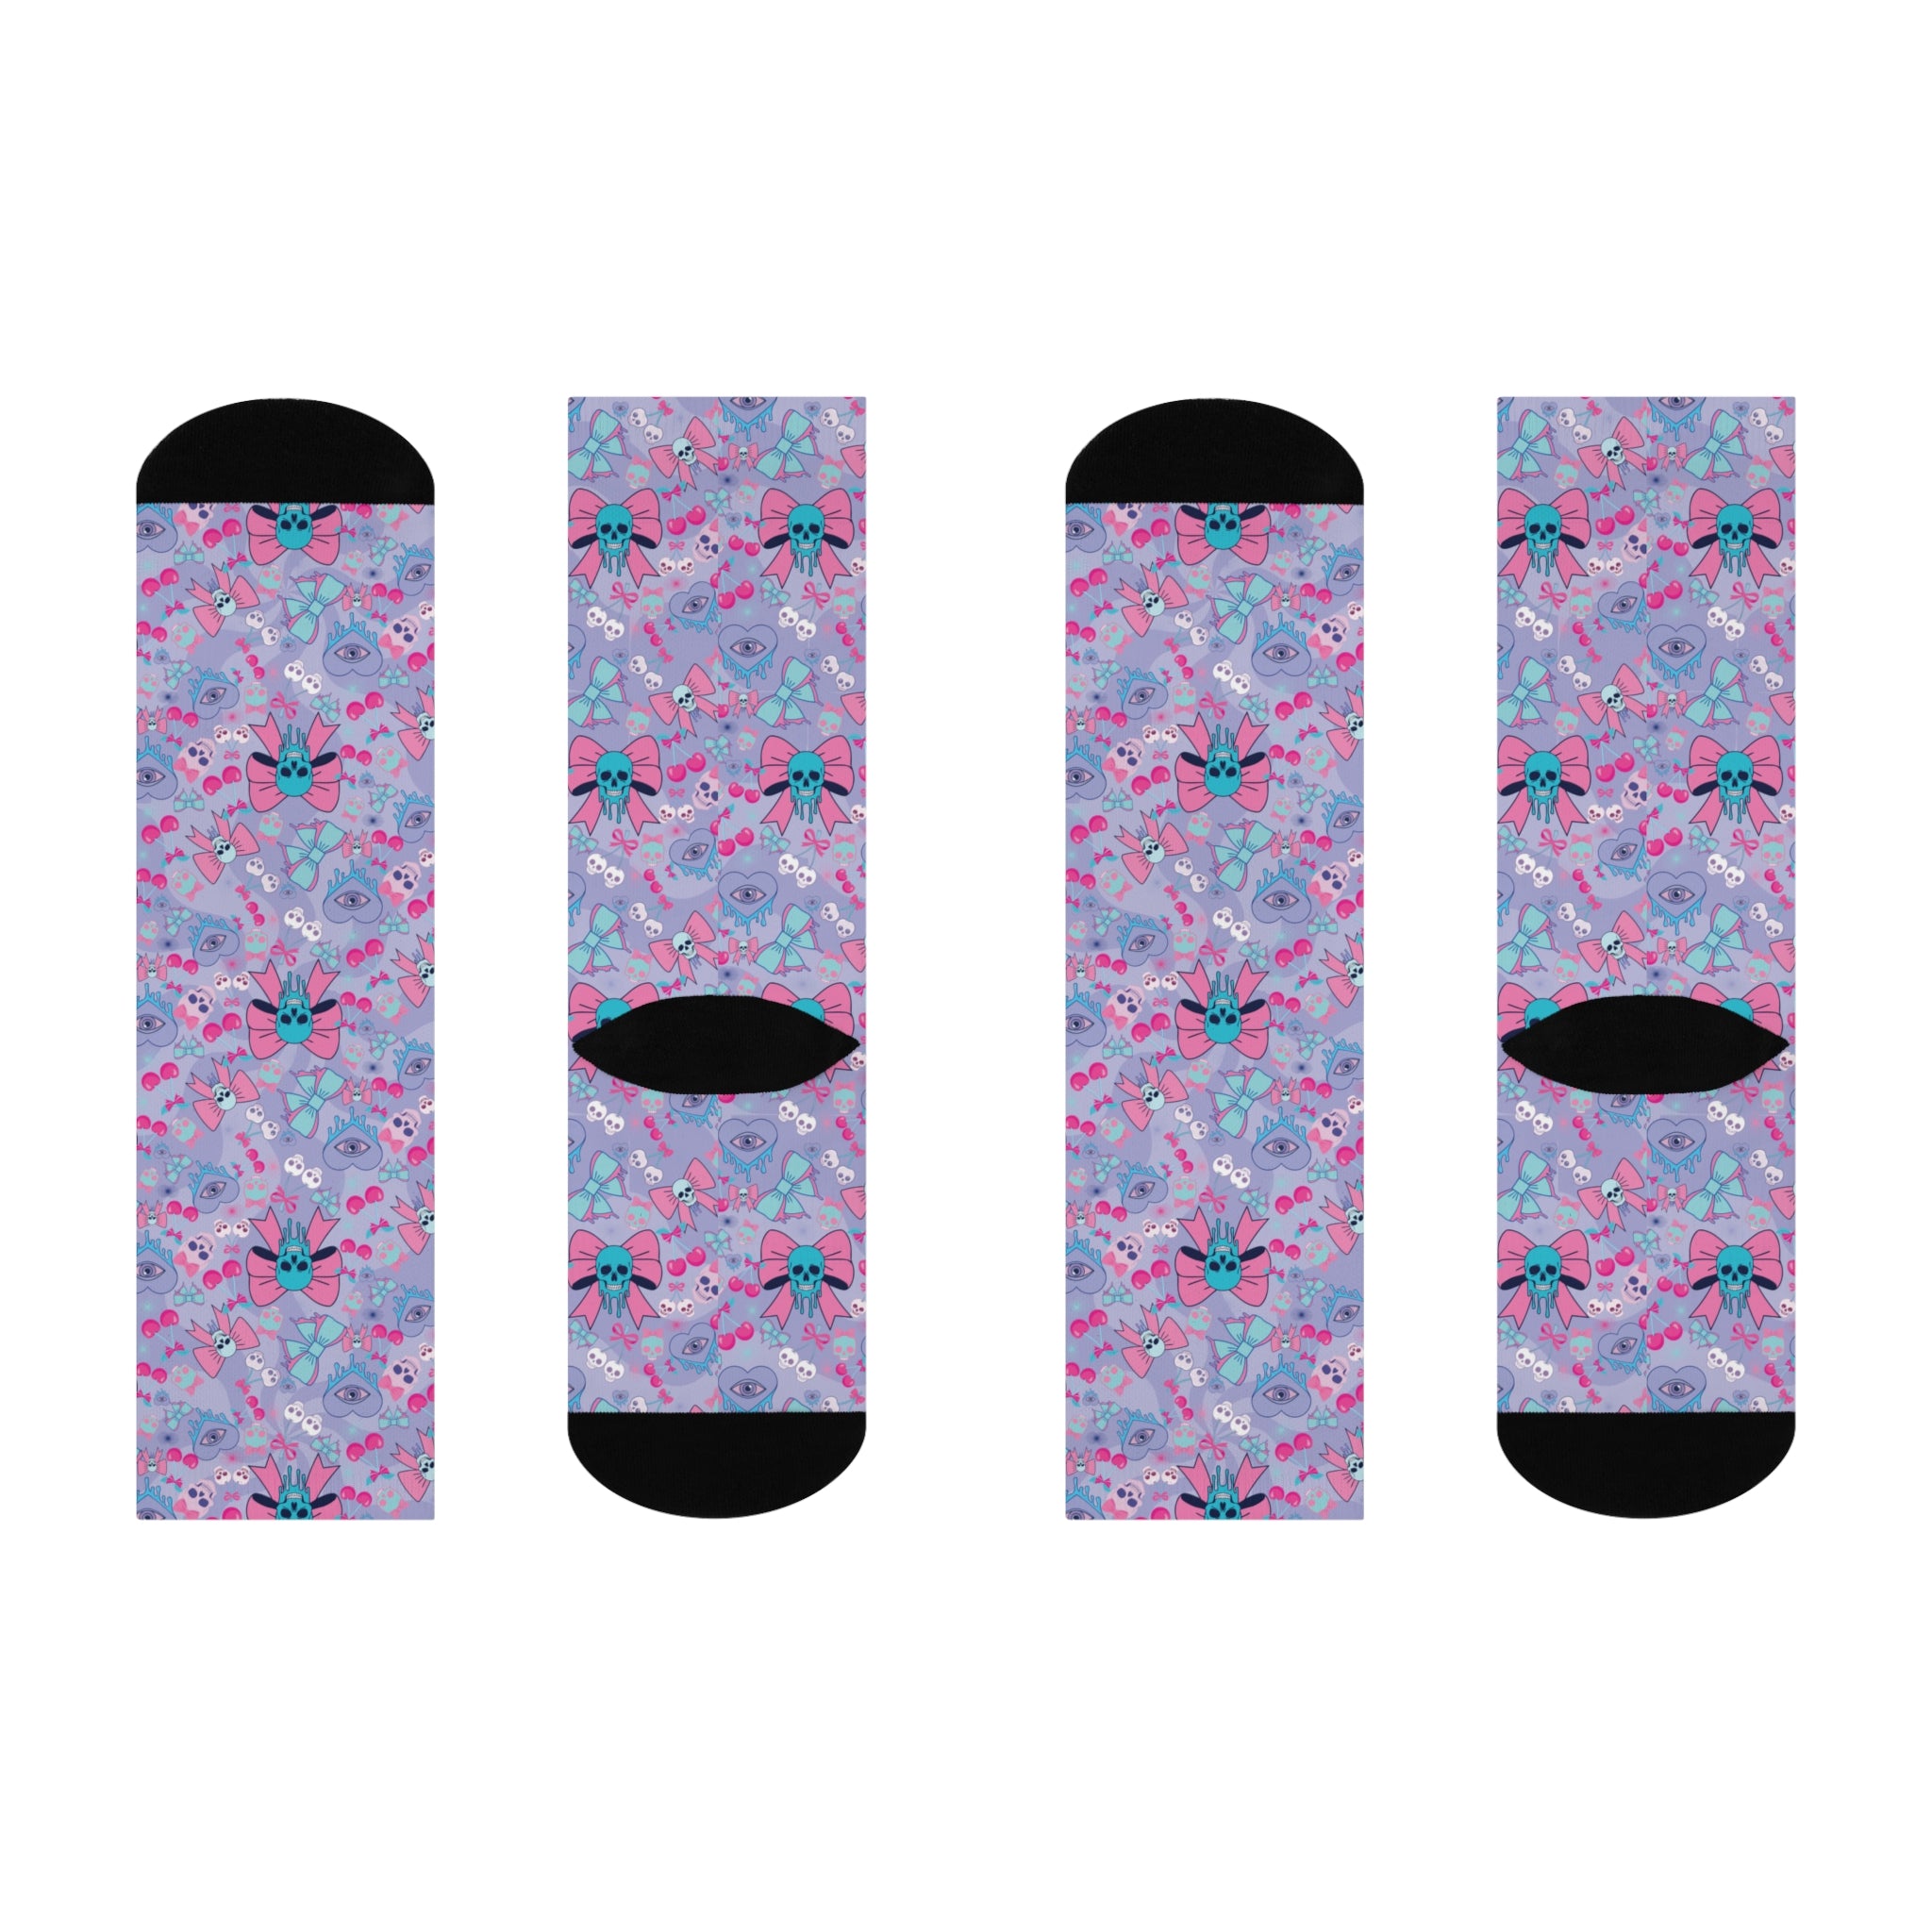 Knee-high socks worn on legs, featuring a pastel blue background with a quirky pattern. The pattern includes pink and teal skulls, some adorned with bows, alongside images of cherries, hearts, and additional bow designs. The socks have black toes and heels, contrasting with the colorful pattern. The overall effect is a playful mix of cute and edgy elements.